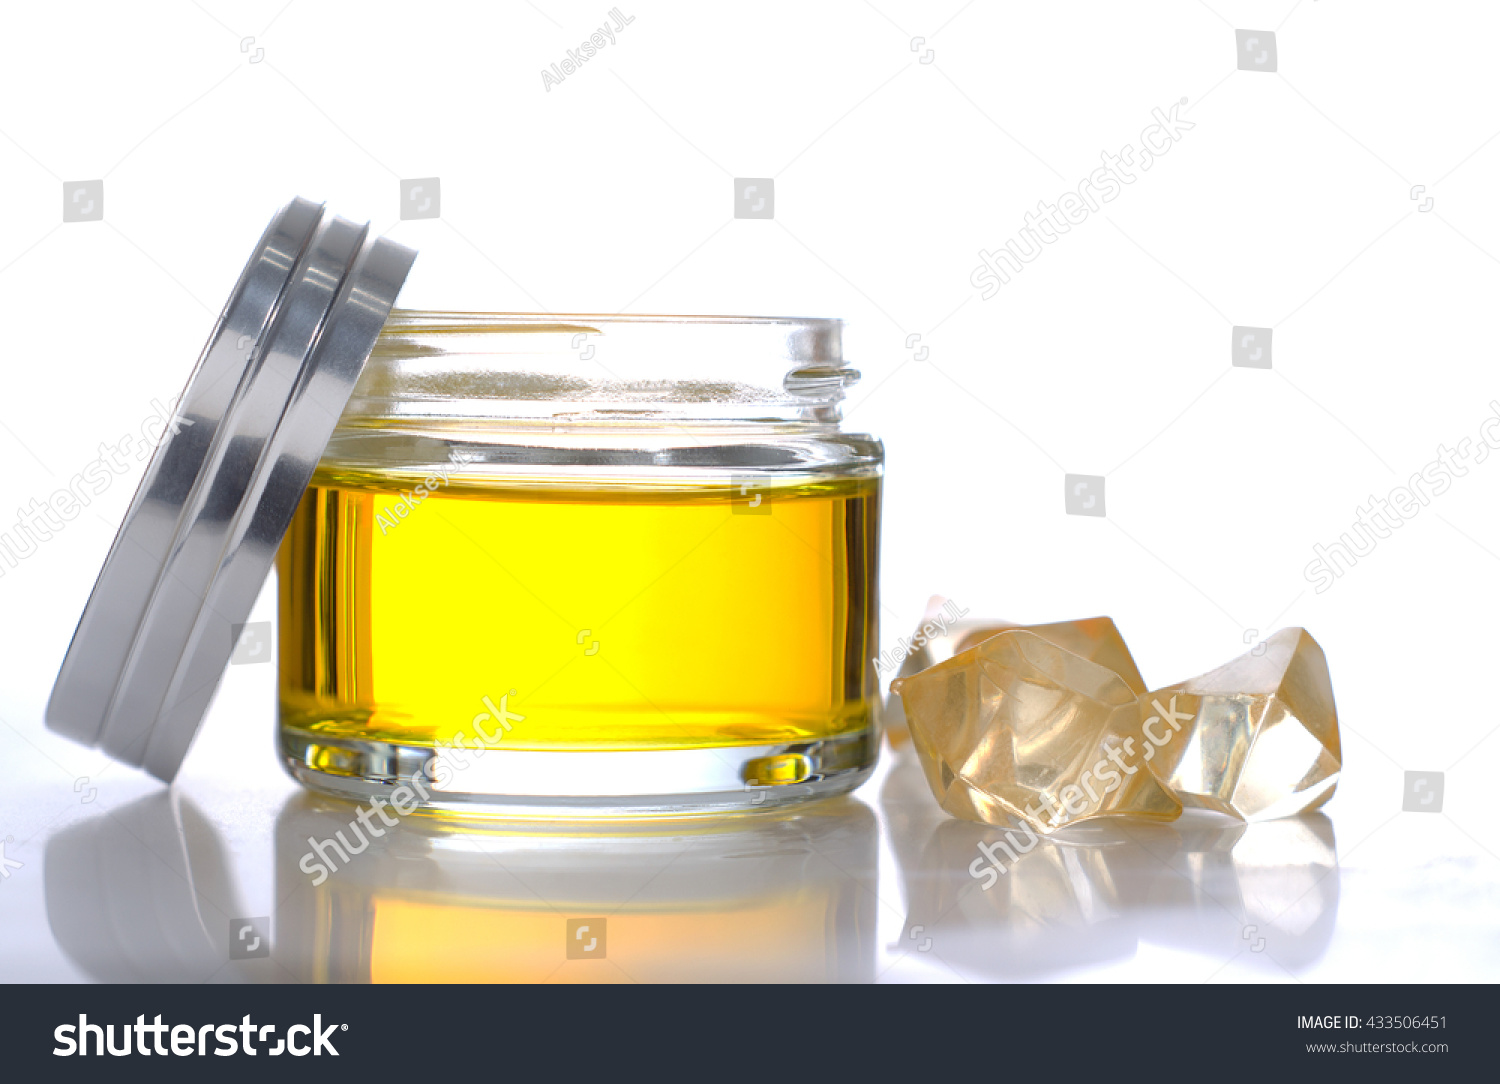 Download Jar Yellow Gel Crystals On White Stock Photo Edit Now 433506451 PSD Mockup Templates